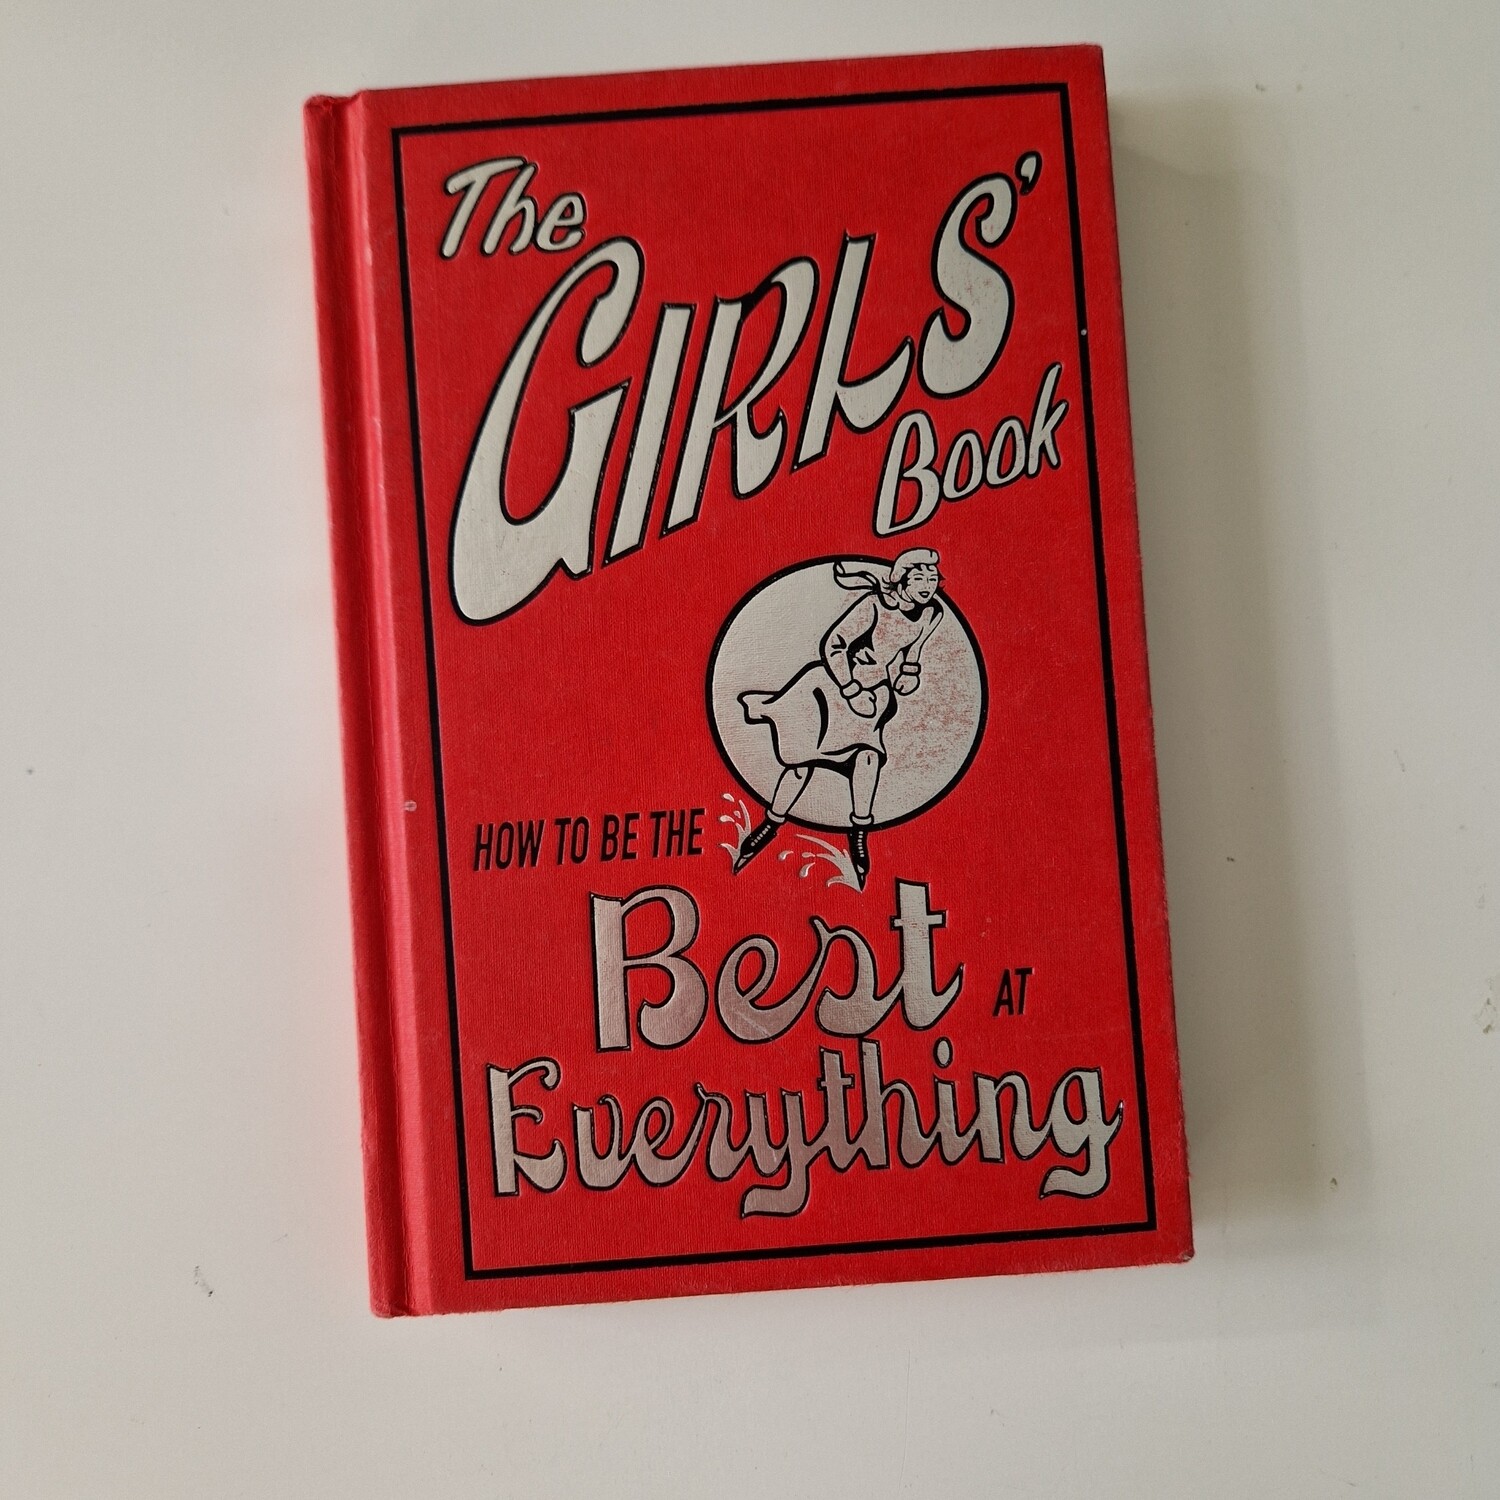 The Girls' Book - how to be the best of everything